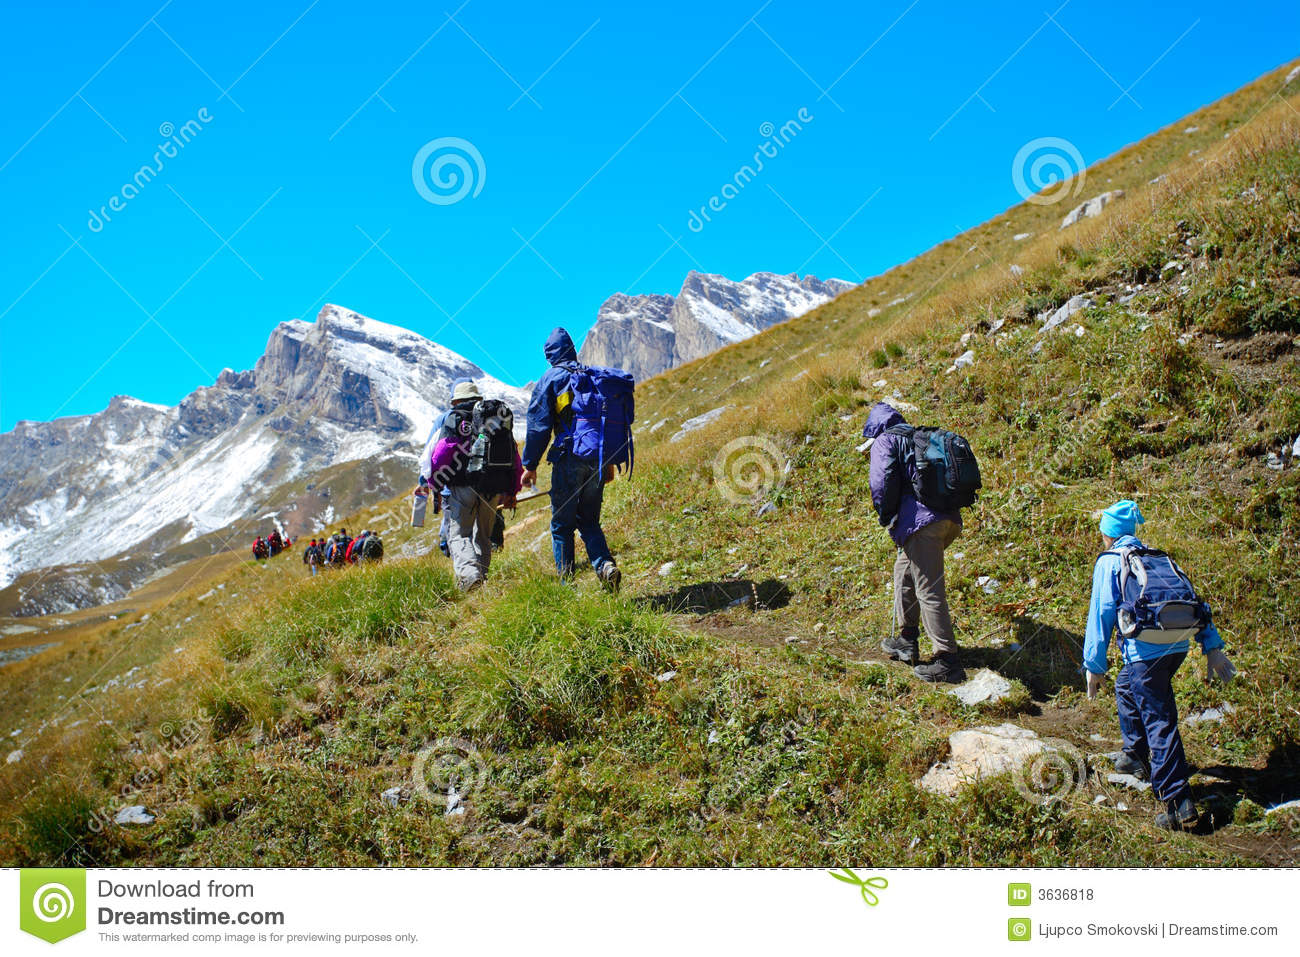 Free Pictures of People Hiking